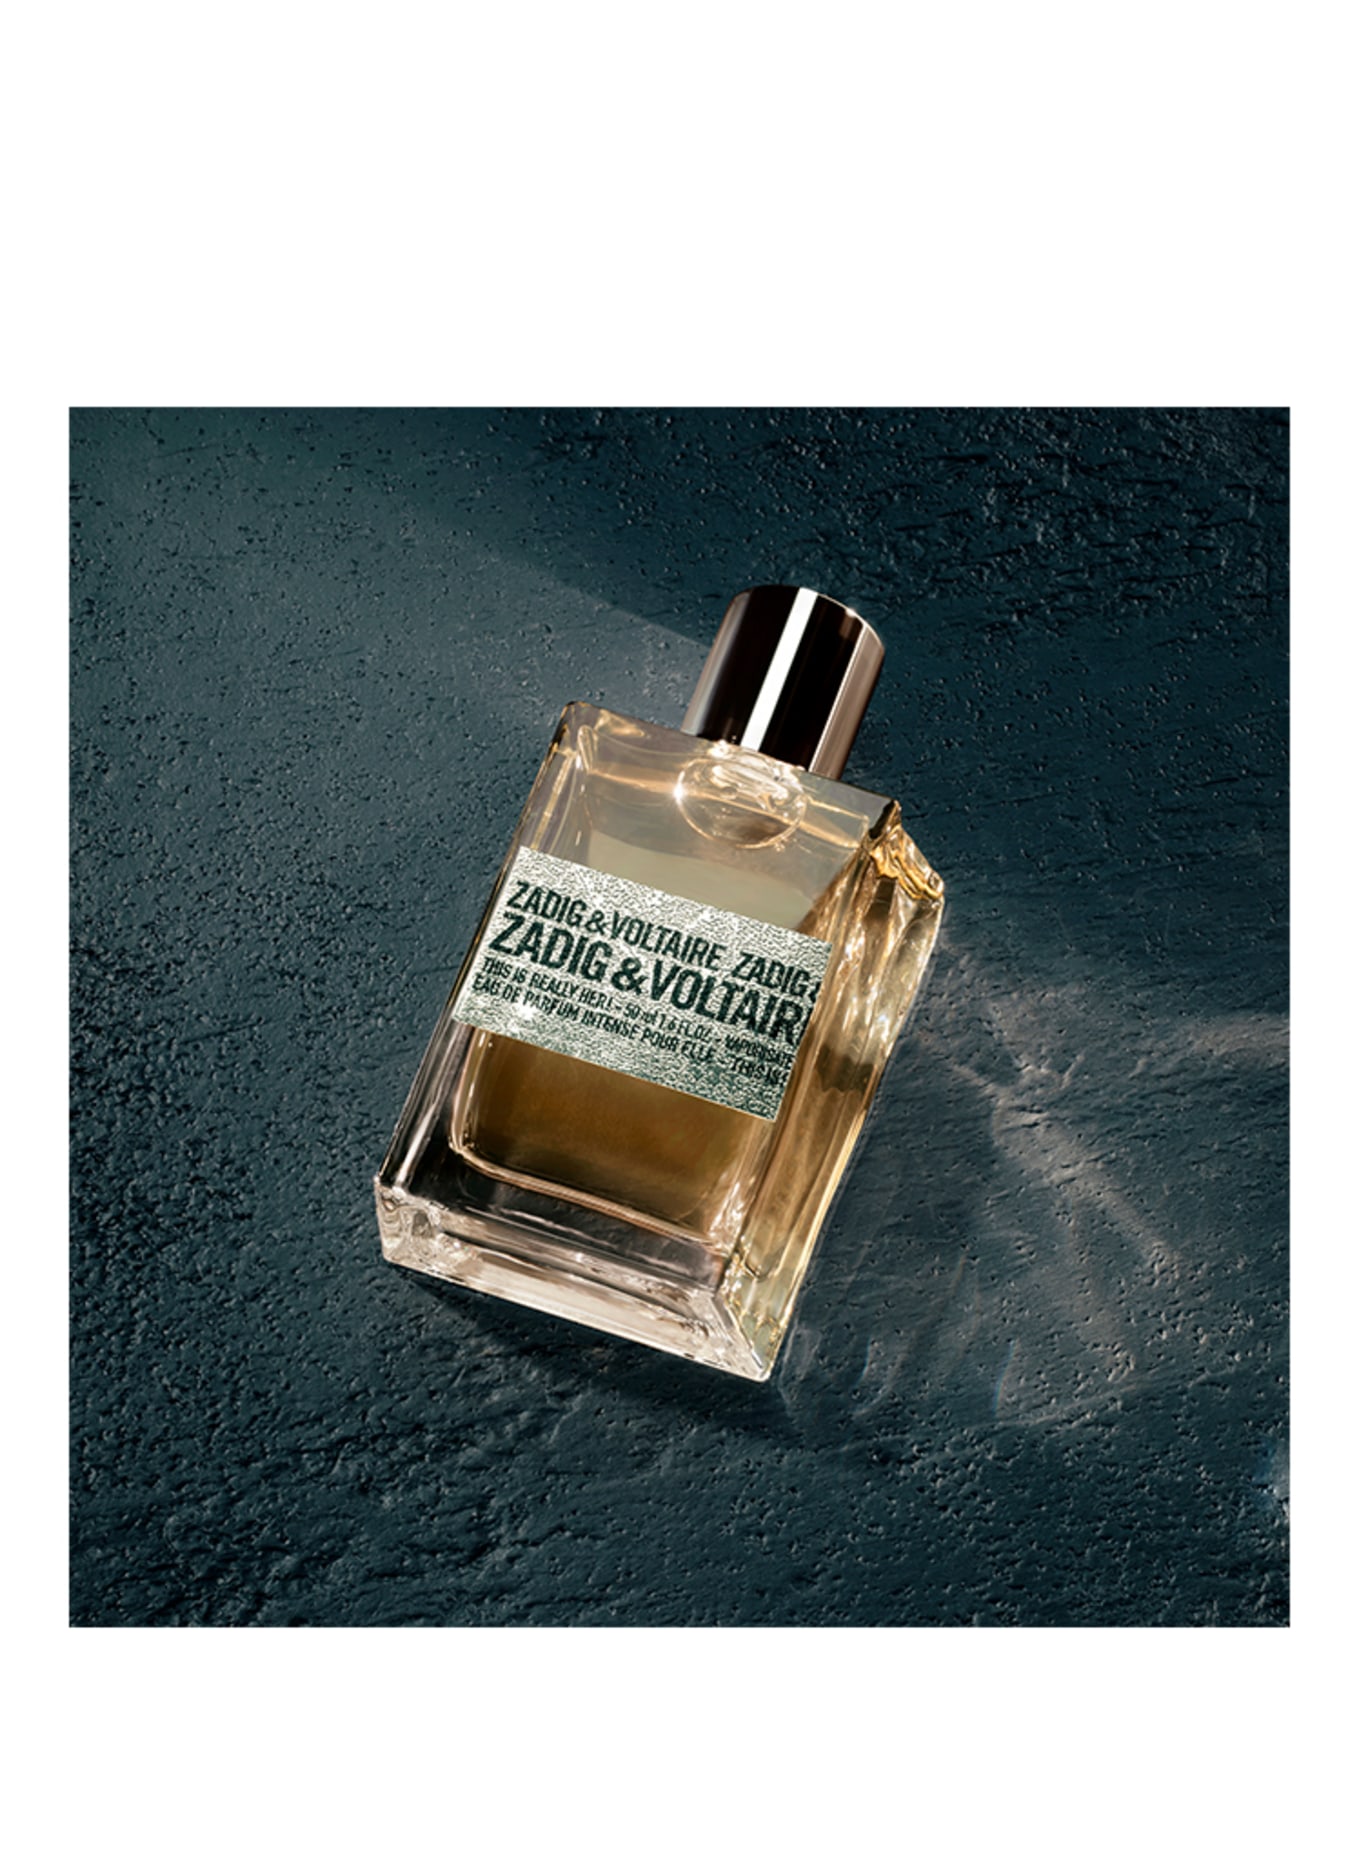 ZADIG & VOLTAIRE Fragrances THIS IS REALLY HER! (Obrázek 2)